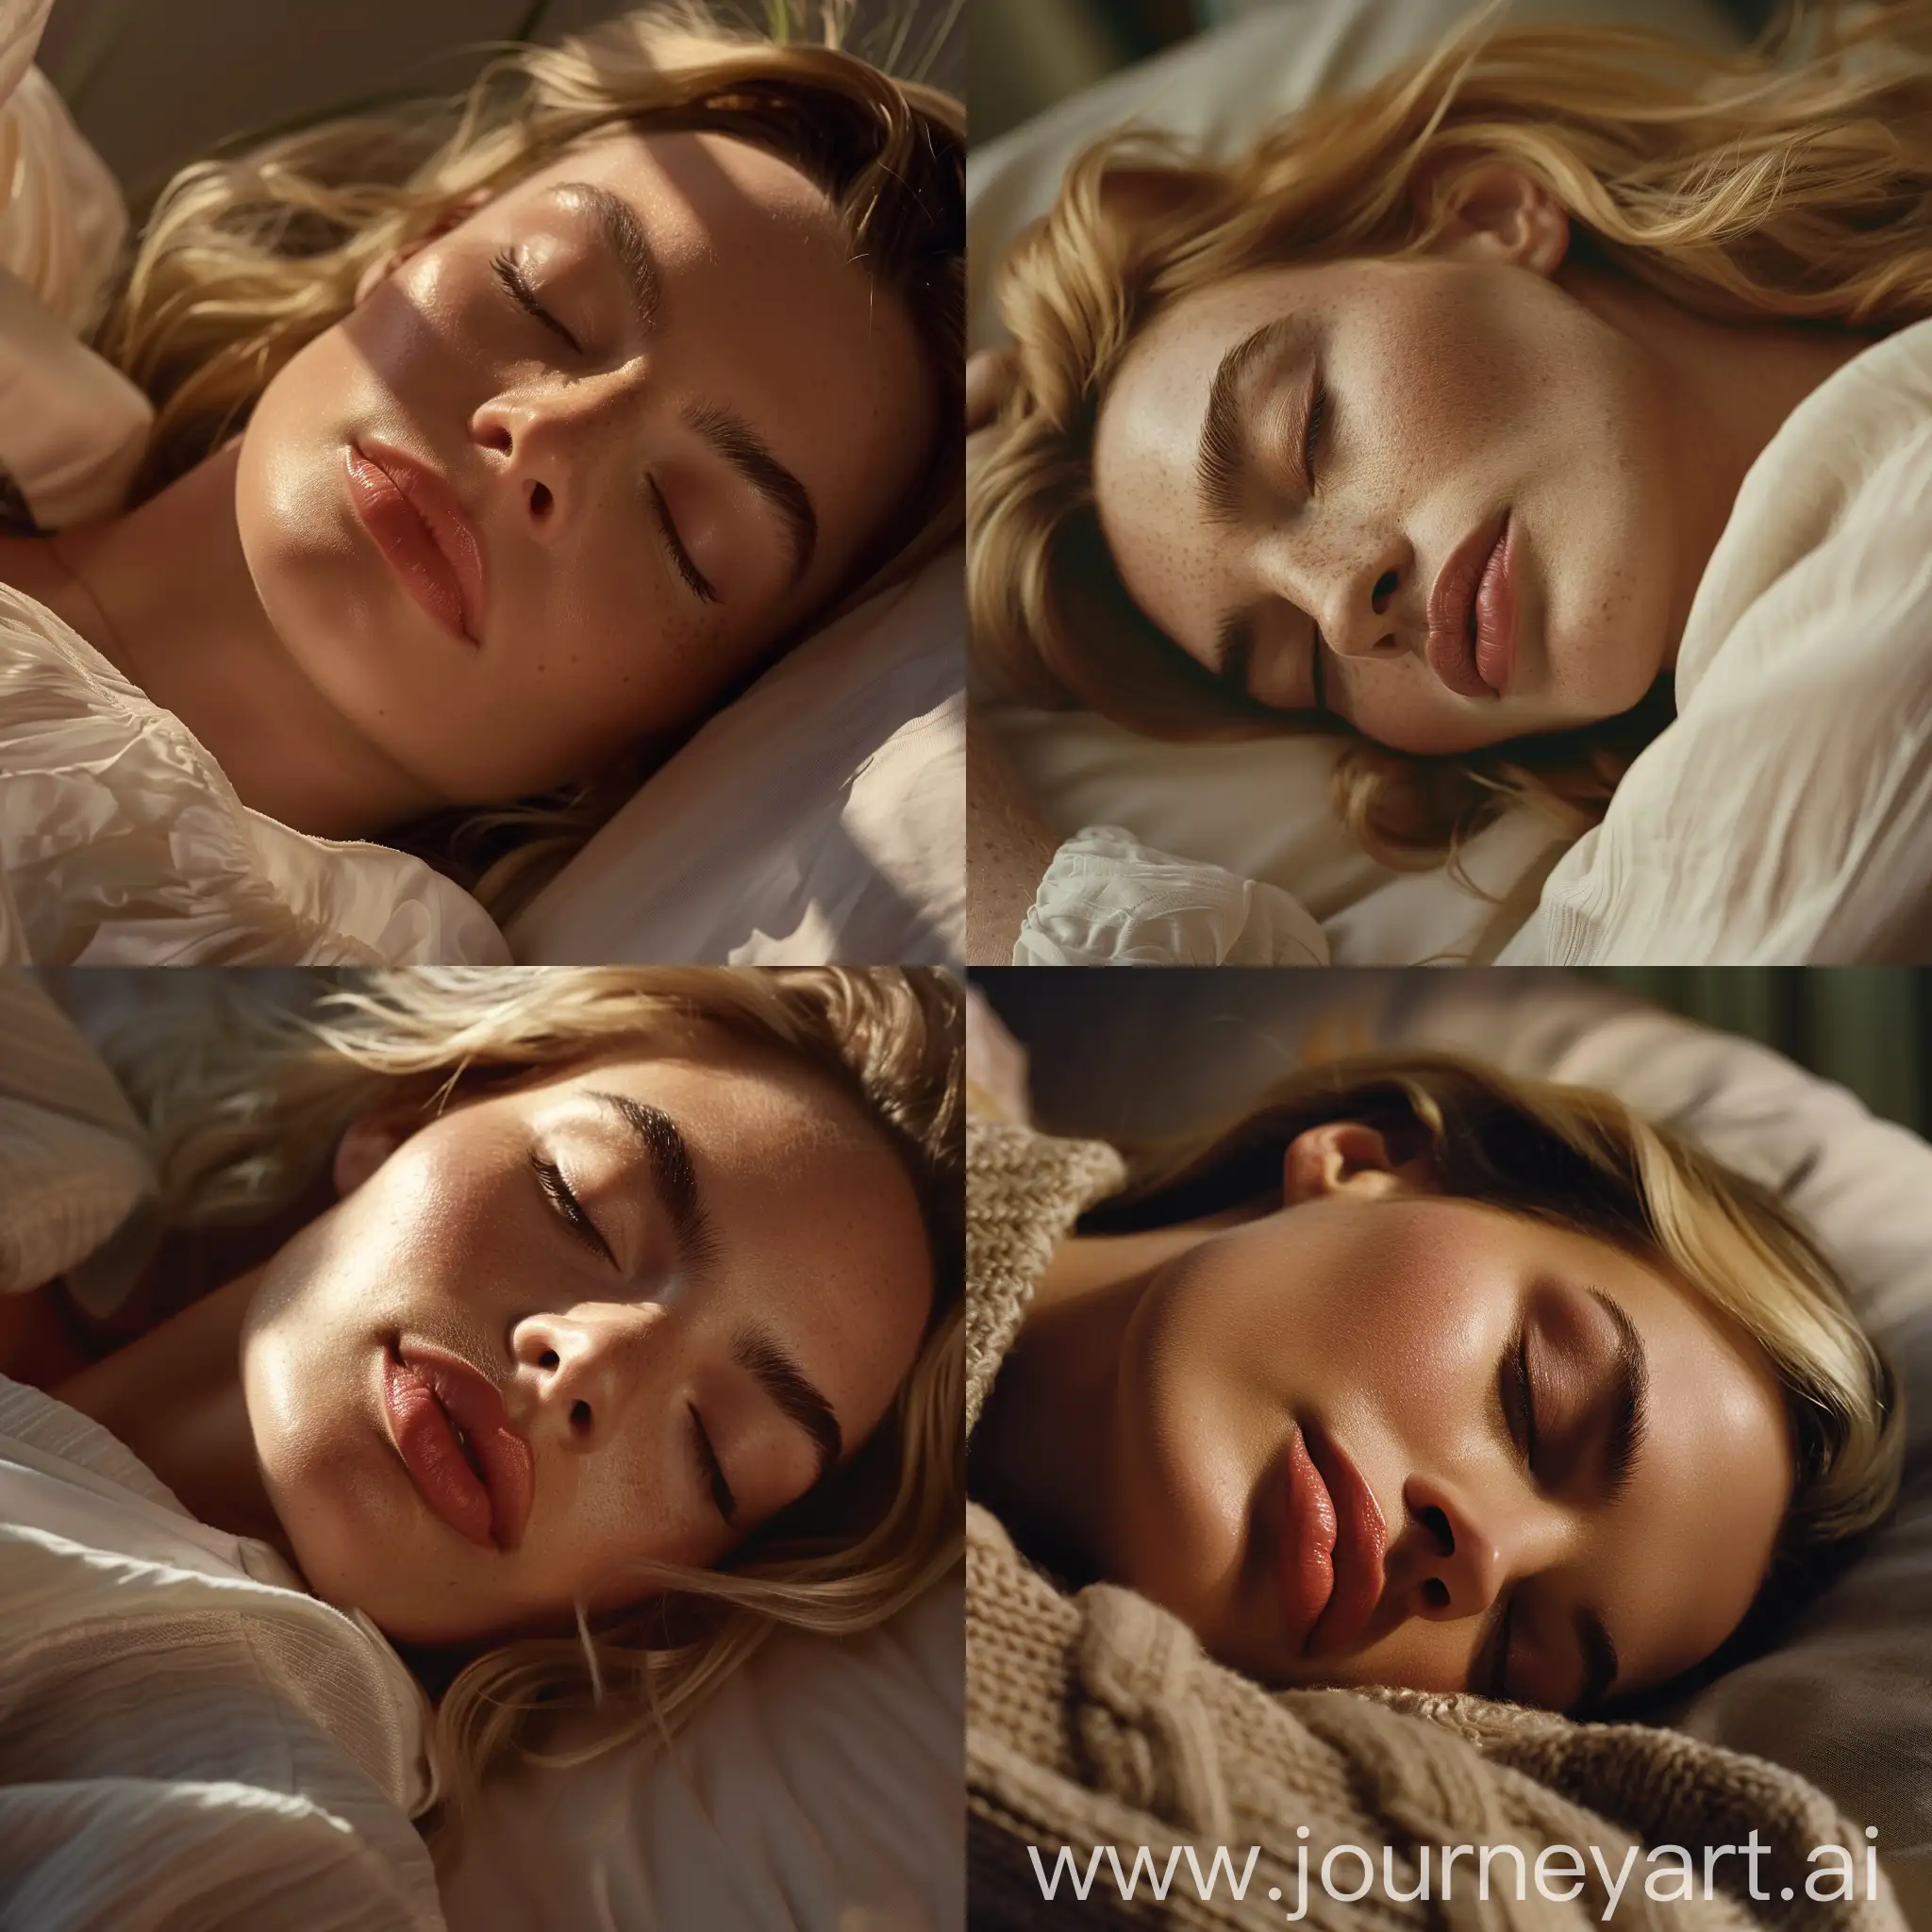 Professional photography: Margot Robbie, is lying in her bed, sleeping. the face is shown close